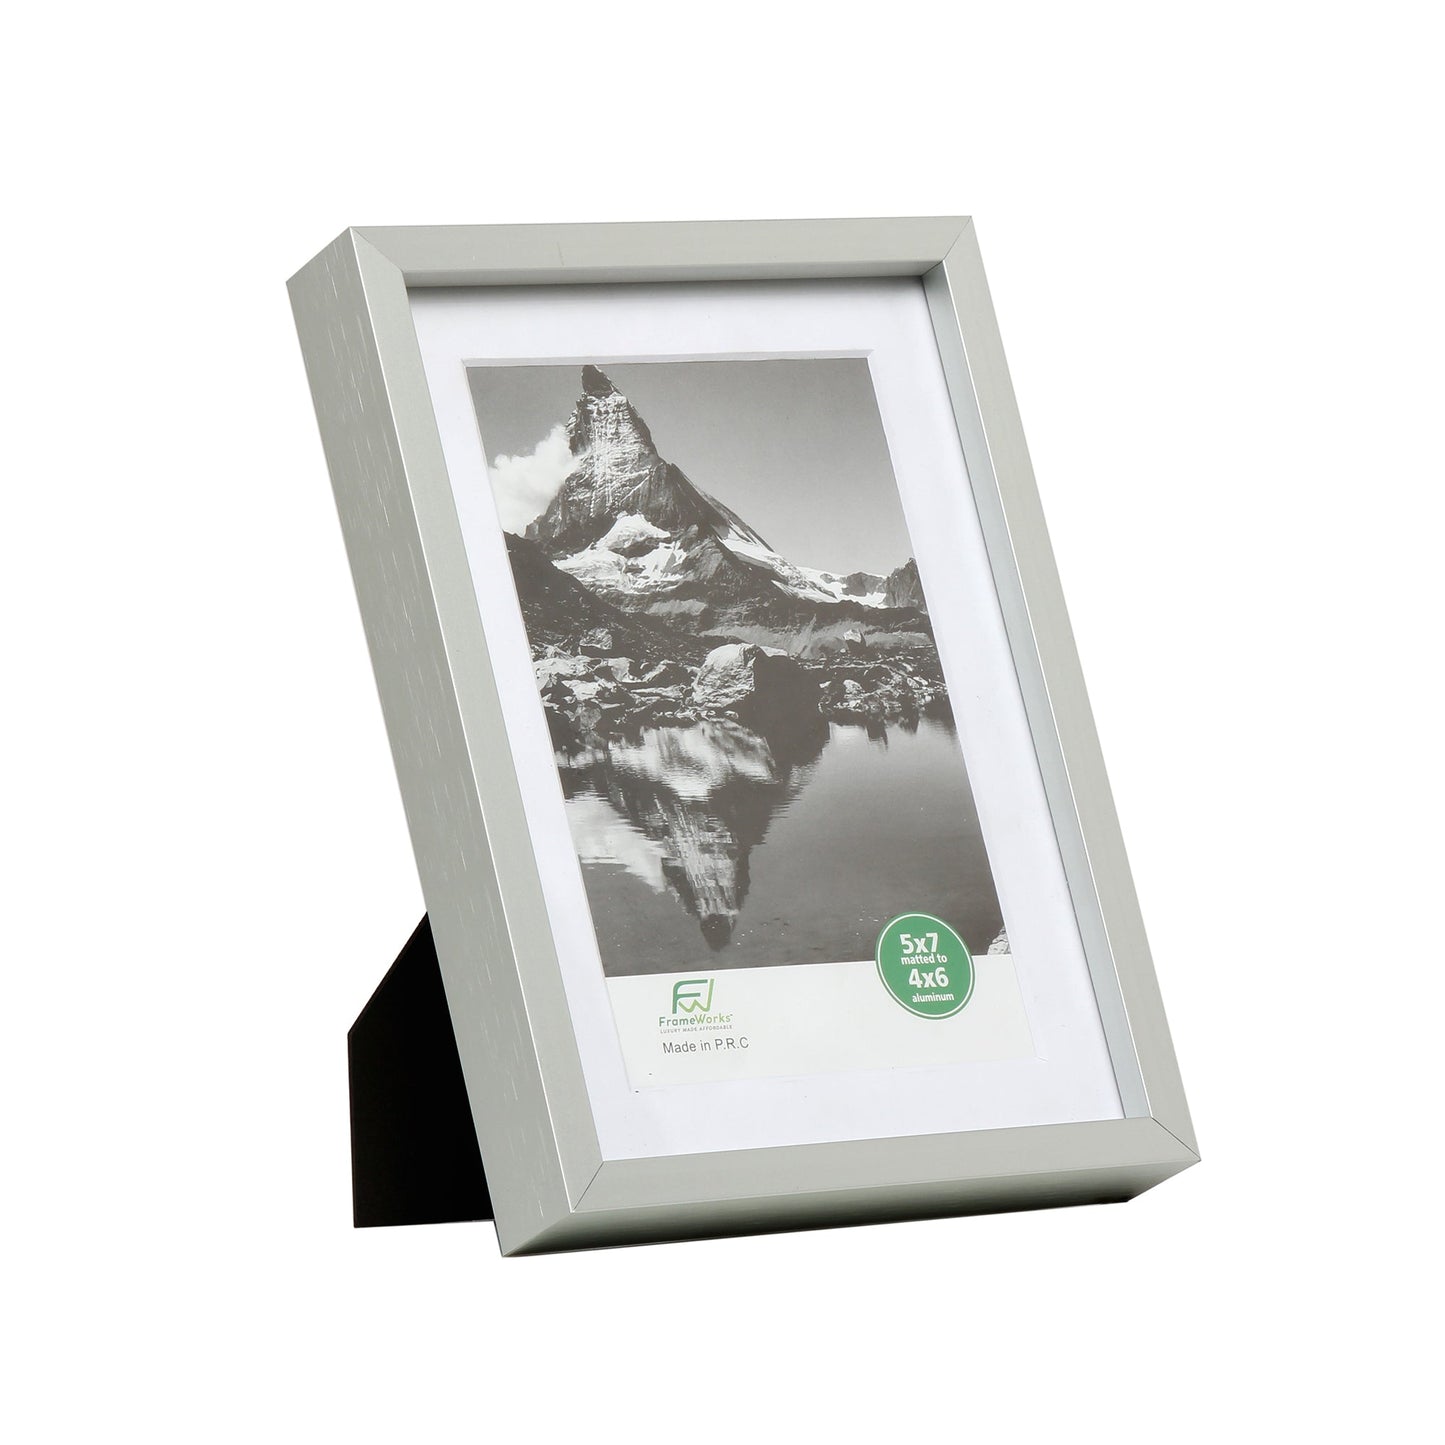 5" x 7" Deluxe Silver Aluminum Contemporary Picture Frame, 4" x 6" Matted